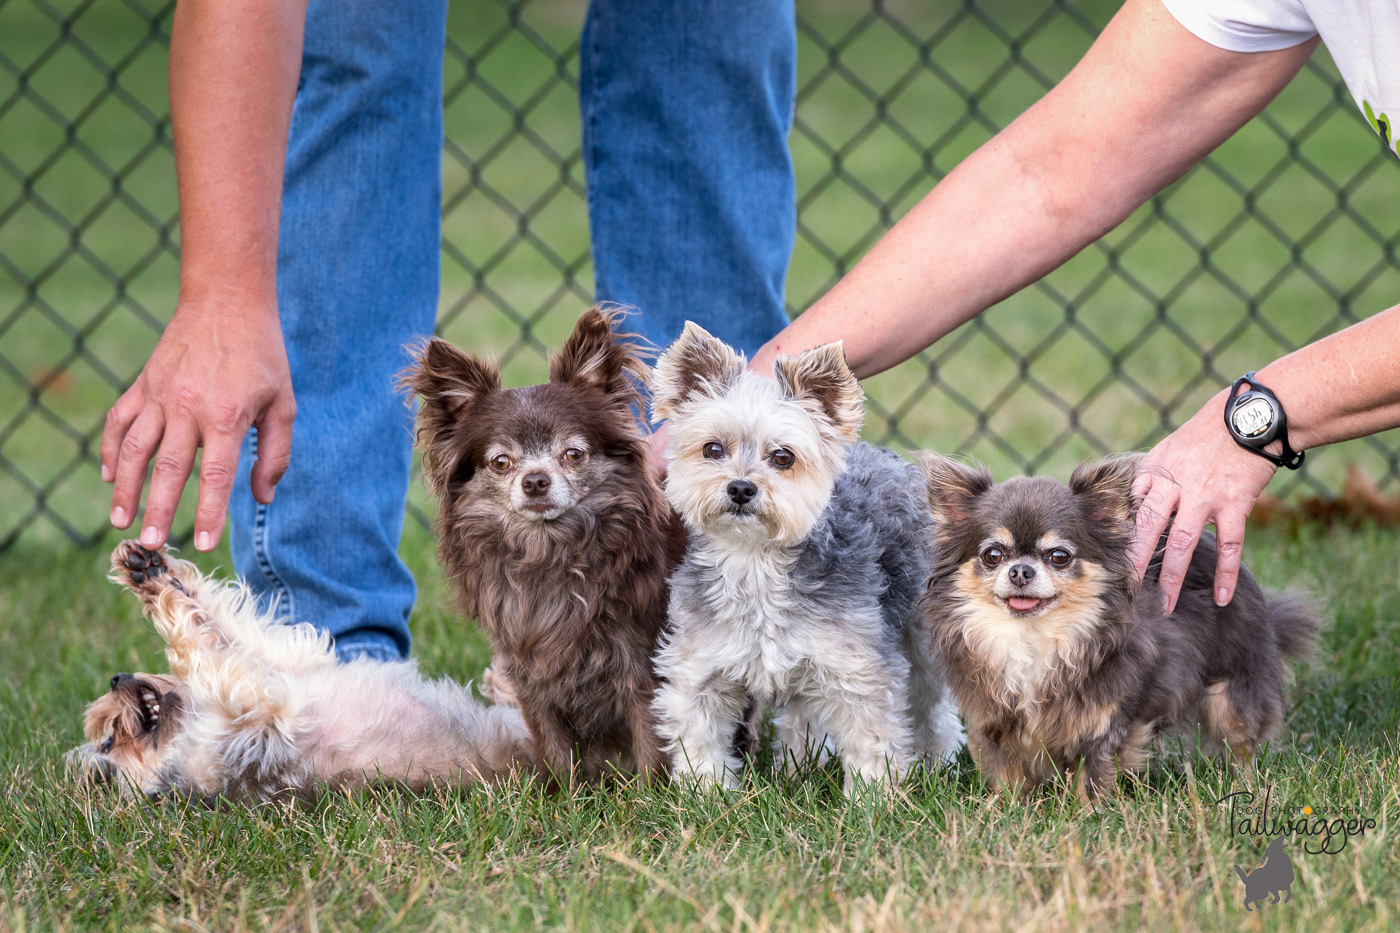 Four dogs line up to have their portrait taken, but one does not cooperate.